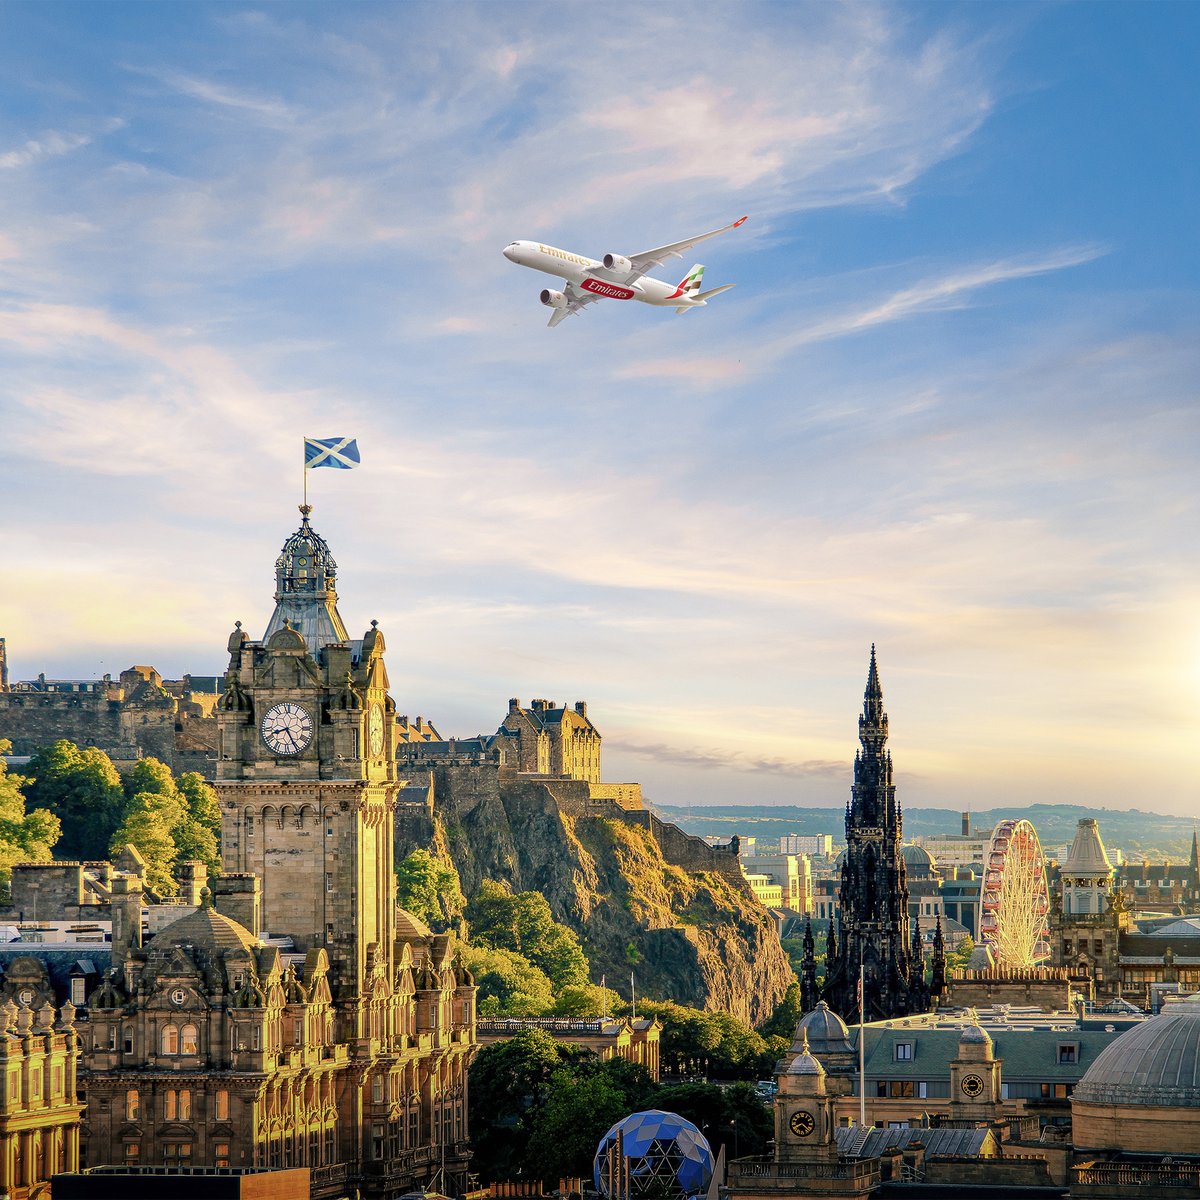 We’re back in Edinburgh! Starting from 4 November, customers can enjoy daily A350 flights to the Scottish capital. 🏴󠁧󠁢󠁳󠁣󠁴󠁿 emirat.es/9cnmzg